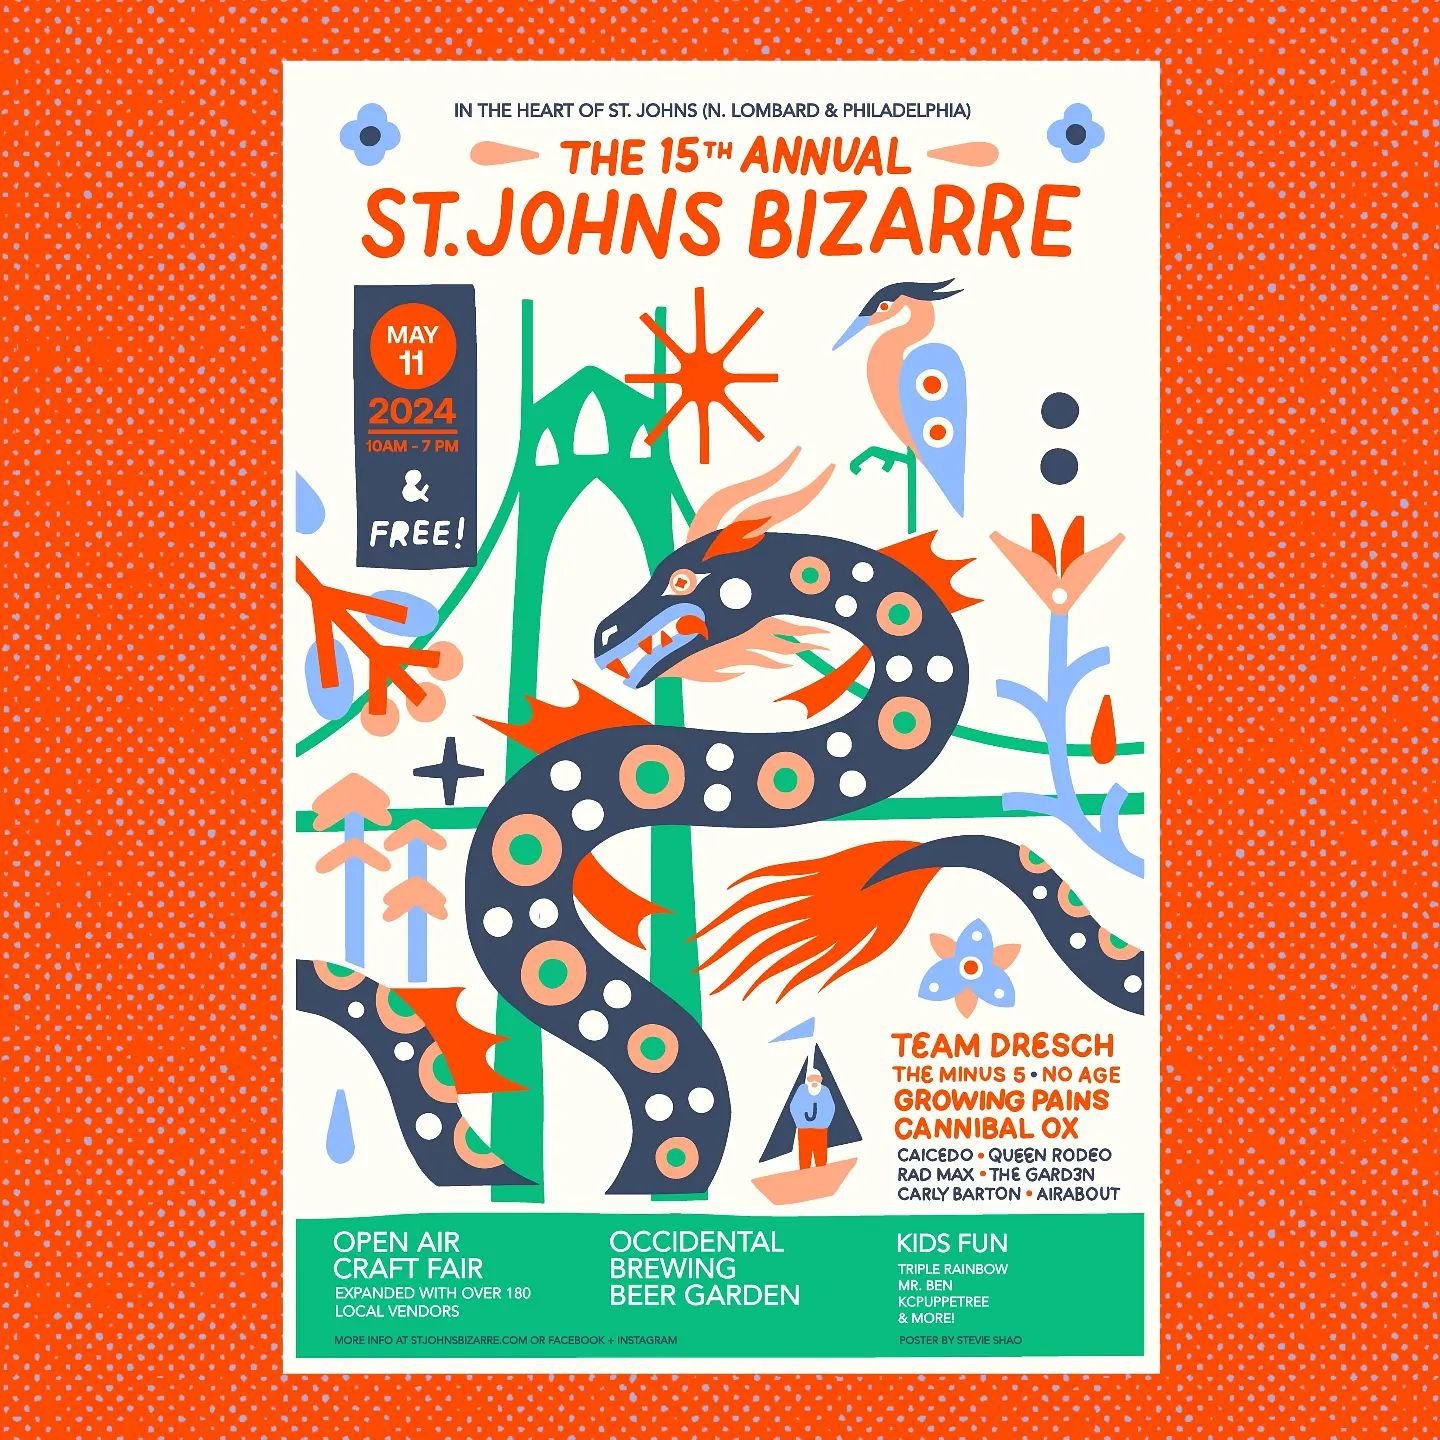 WOO! So excited to be back at the St. John's Bizarre again this year. Saturday, May 11th from 10am - 7pm. There will be music, crafts, food &amp; beer! Not to mention a parade! It's supposed to be warm and beautiful that day. All the details below, c